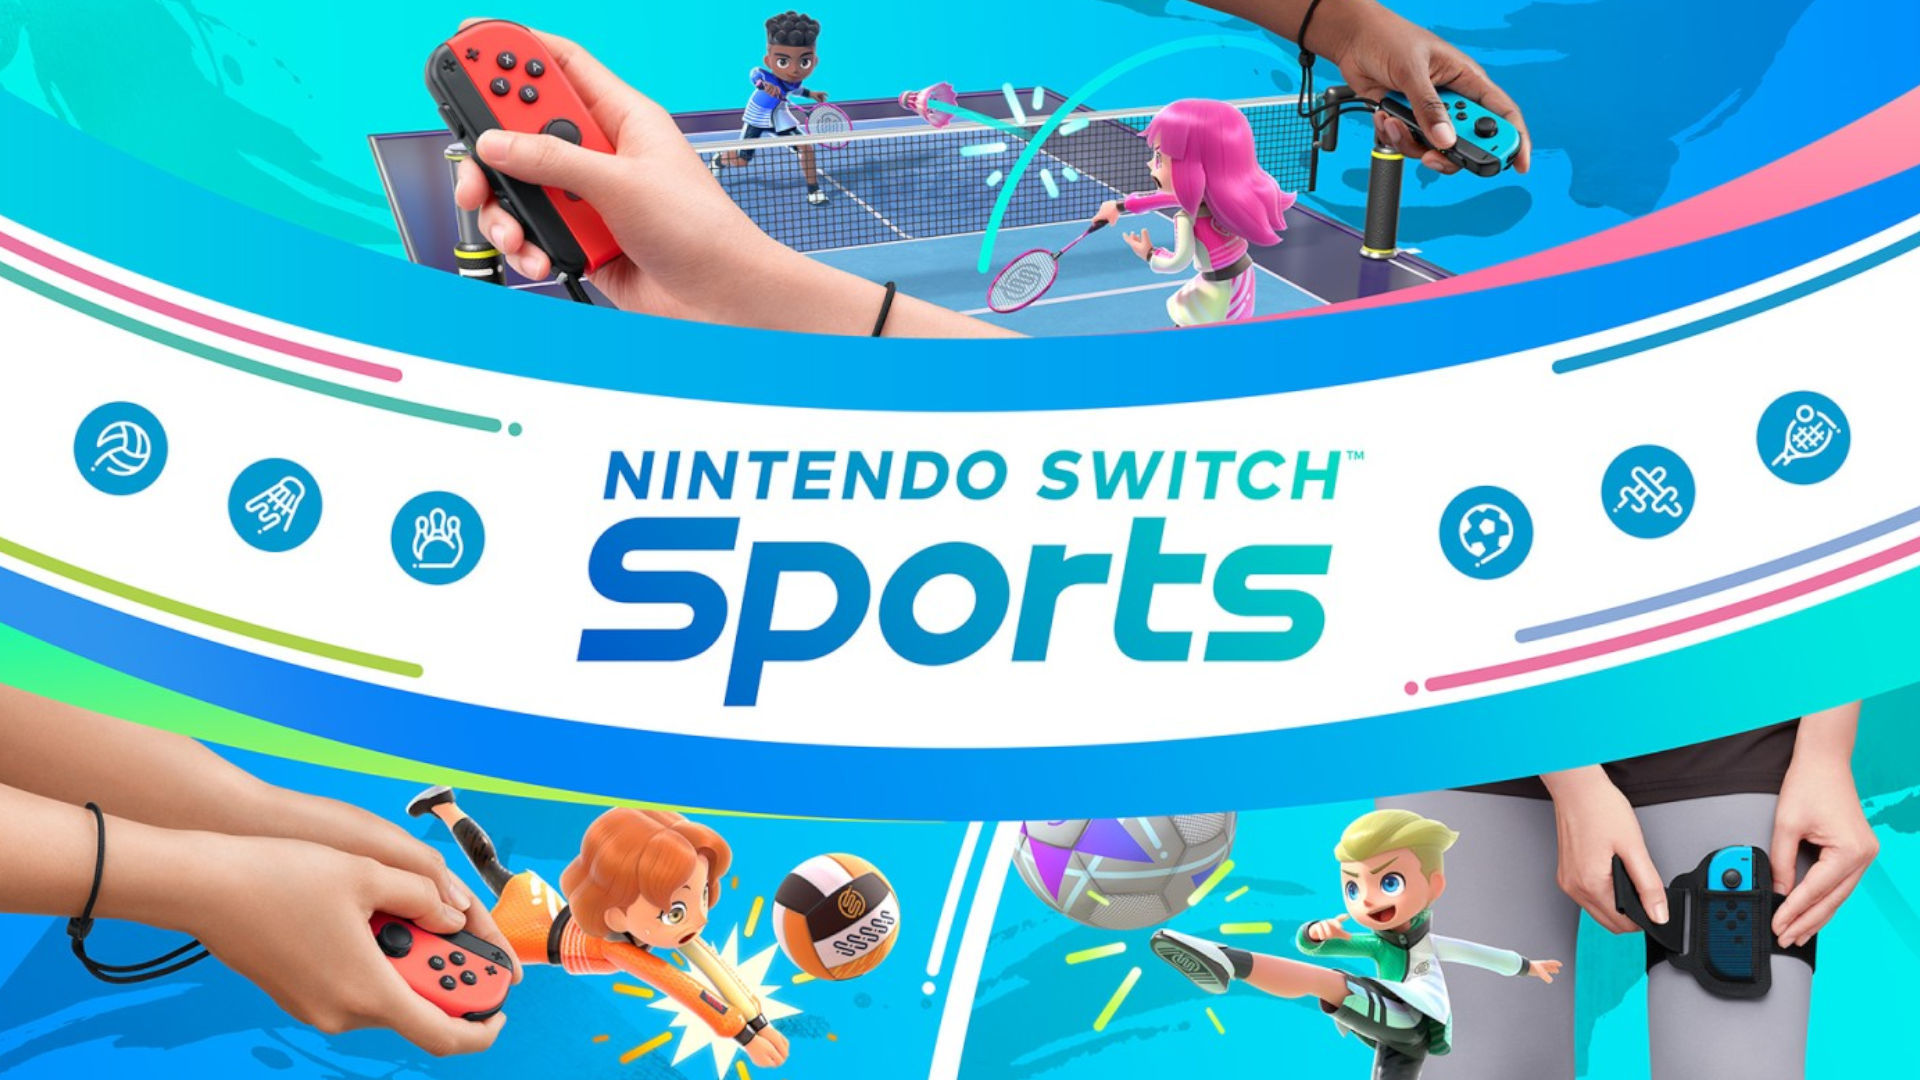 Cover art for Nintendo Switch Sports, which includes bowling games